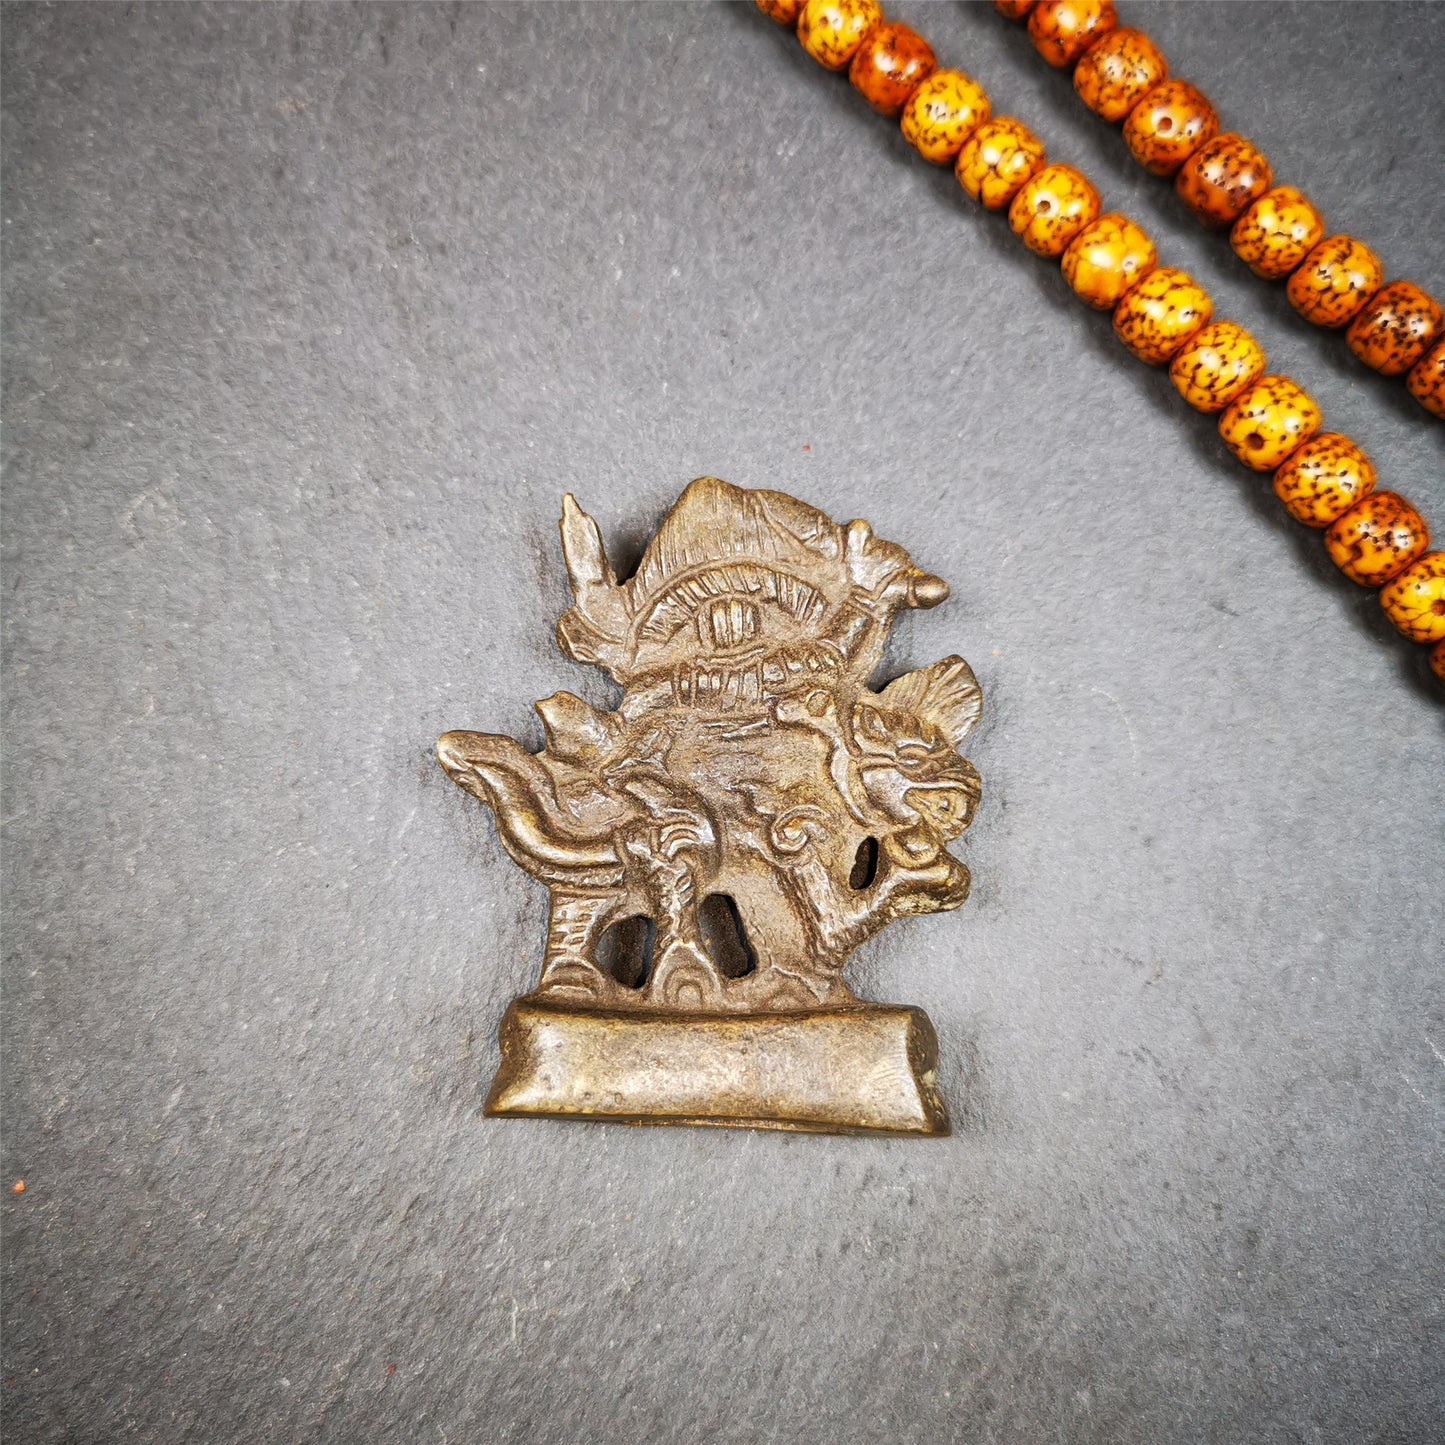 This Dorje Legpa was collected from Gengqing Monastery,for 80 years old. It is an amulet of Dorje Legpa,made of bronze,size is 1.97 by 1.57 inches